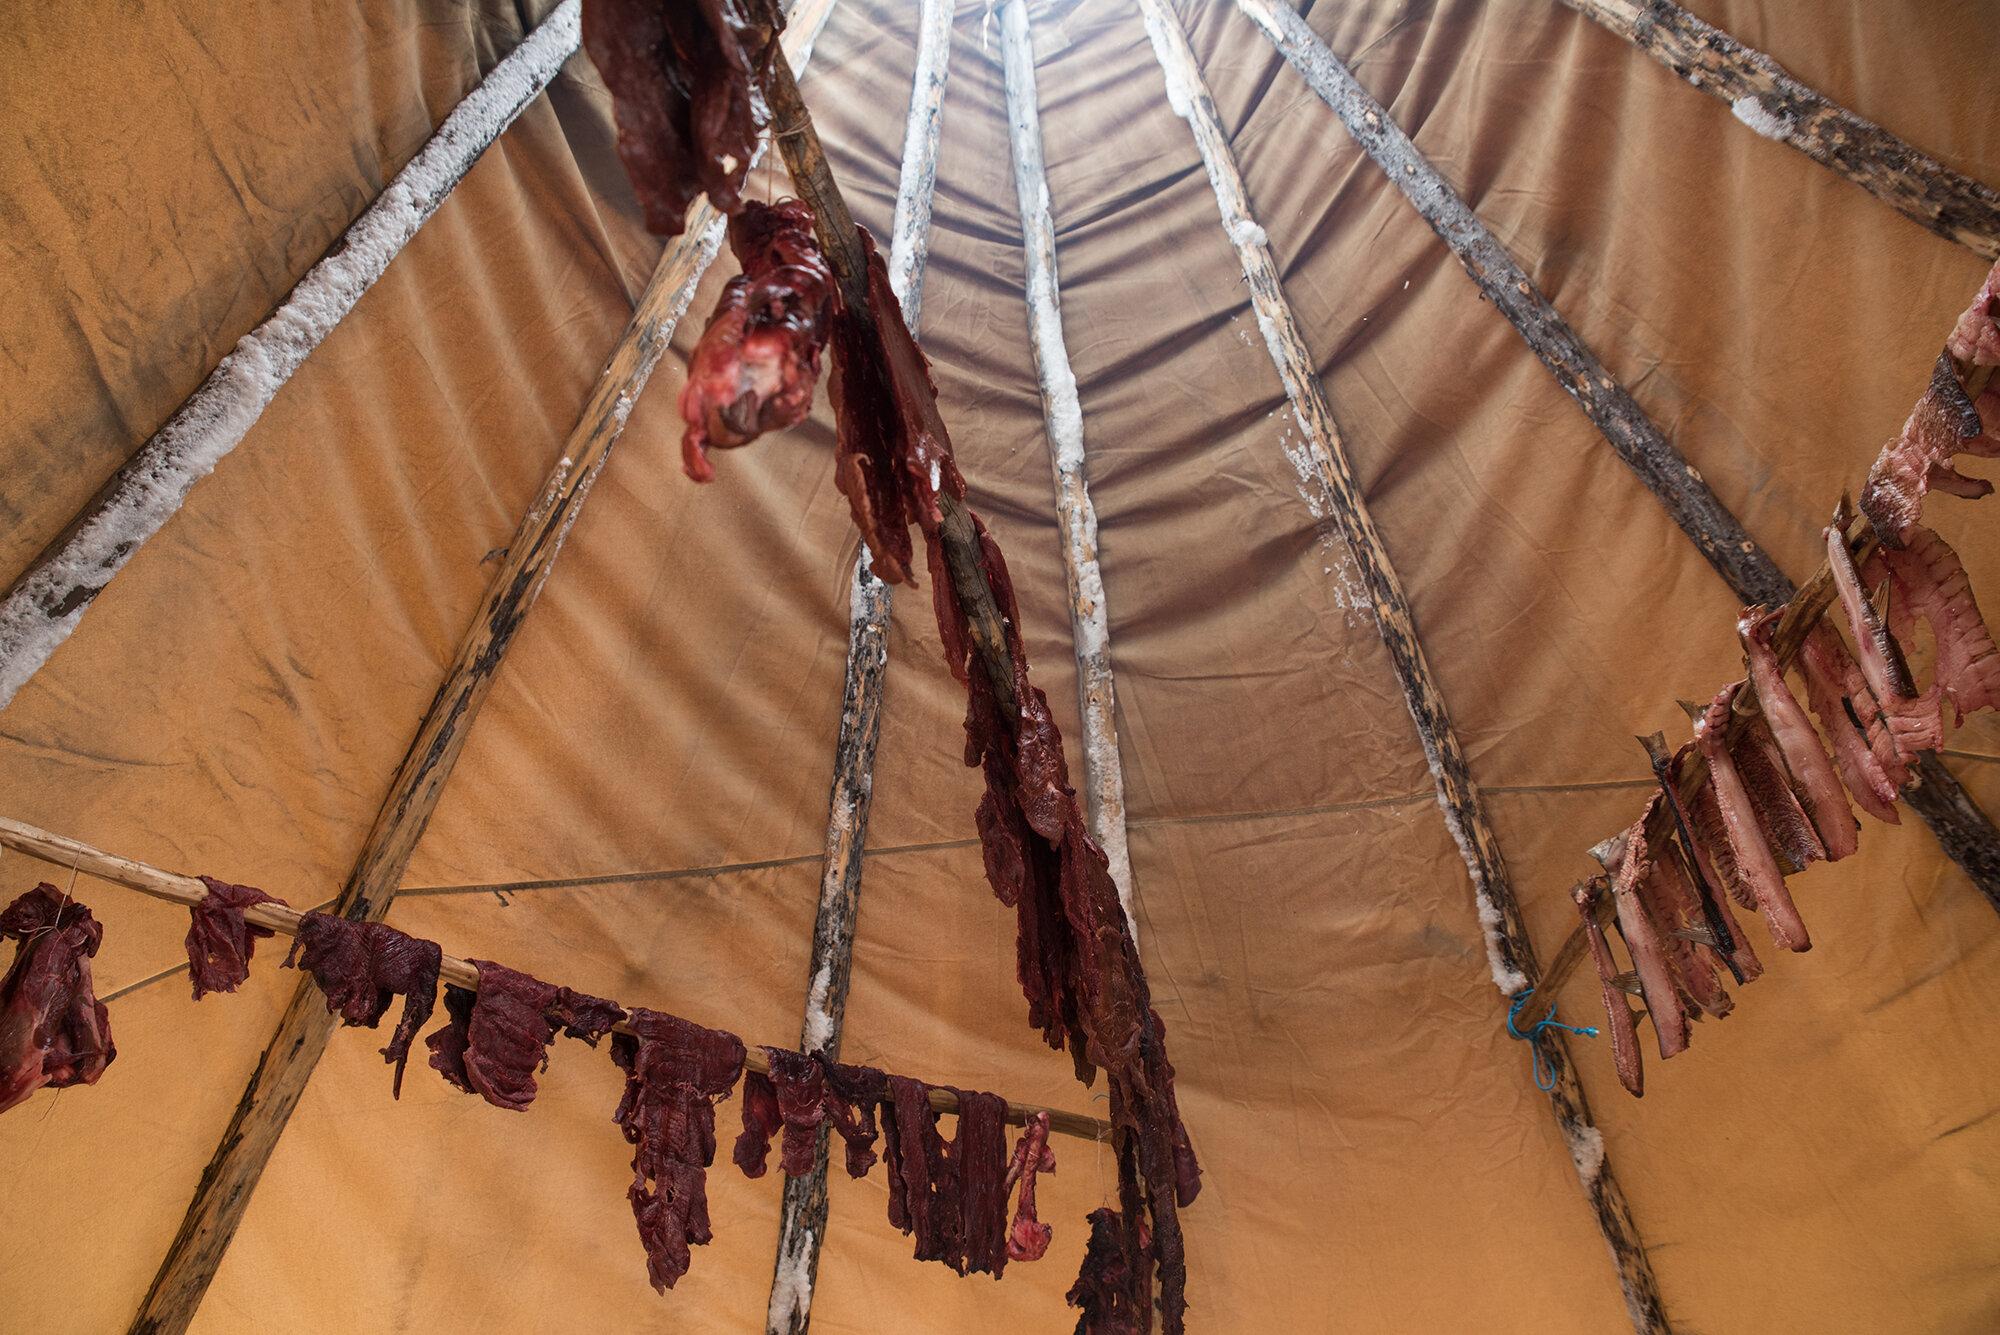 Pandemic Plan - The New York Times - Caribou meat and fish hang and dry inside of a teepee at...